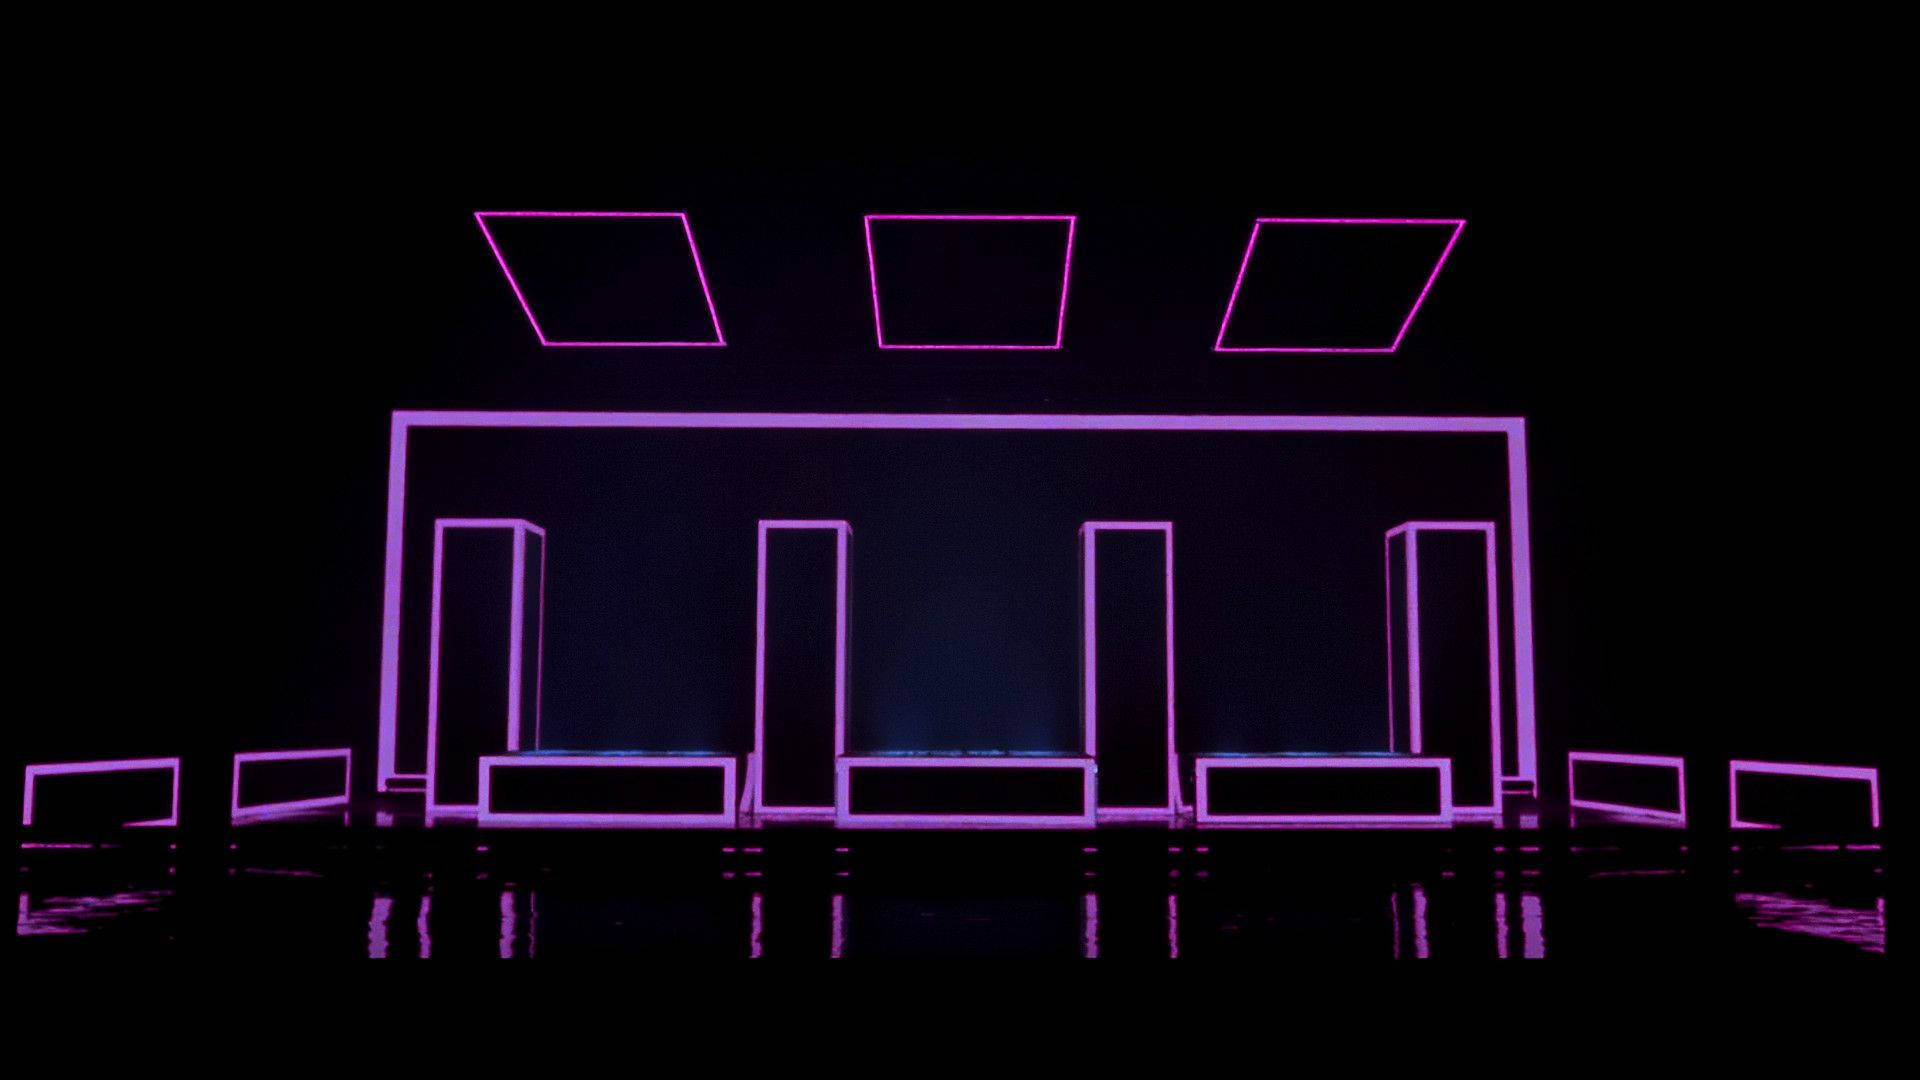 The 1975 Abstract Neon Light Stage Background